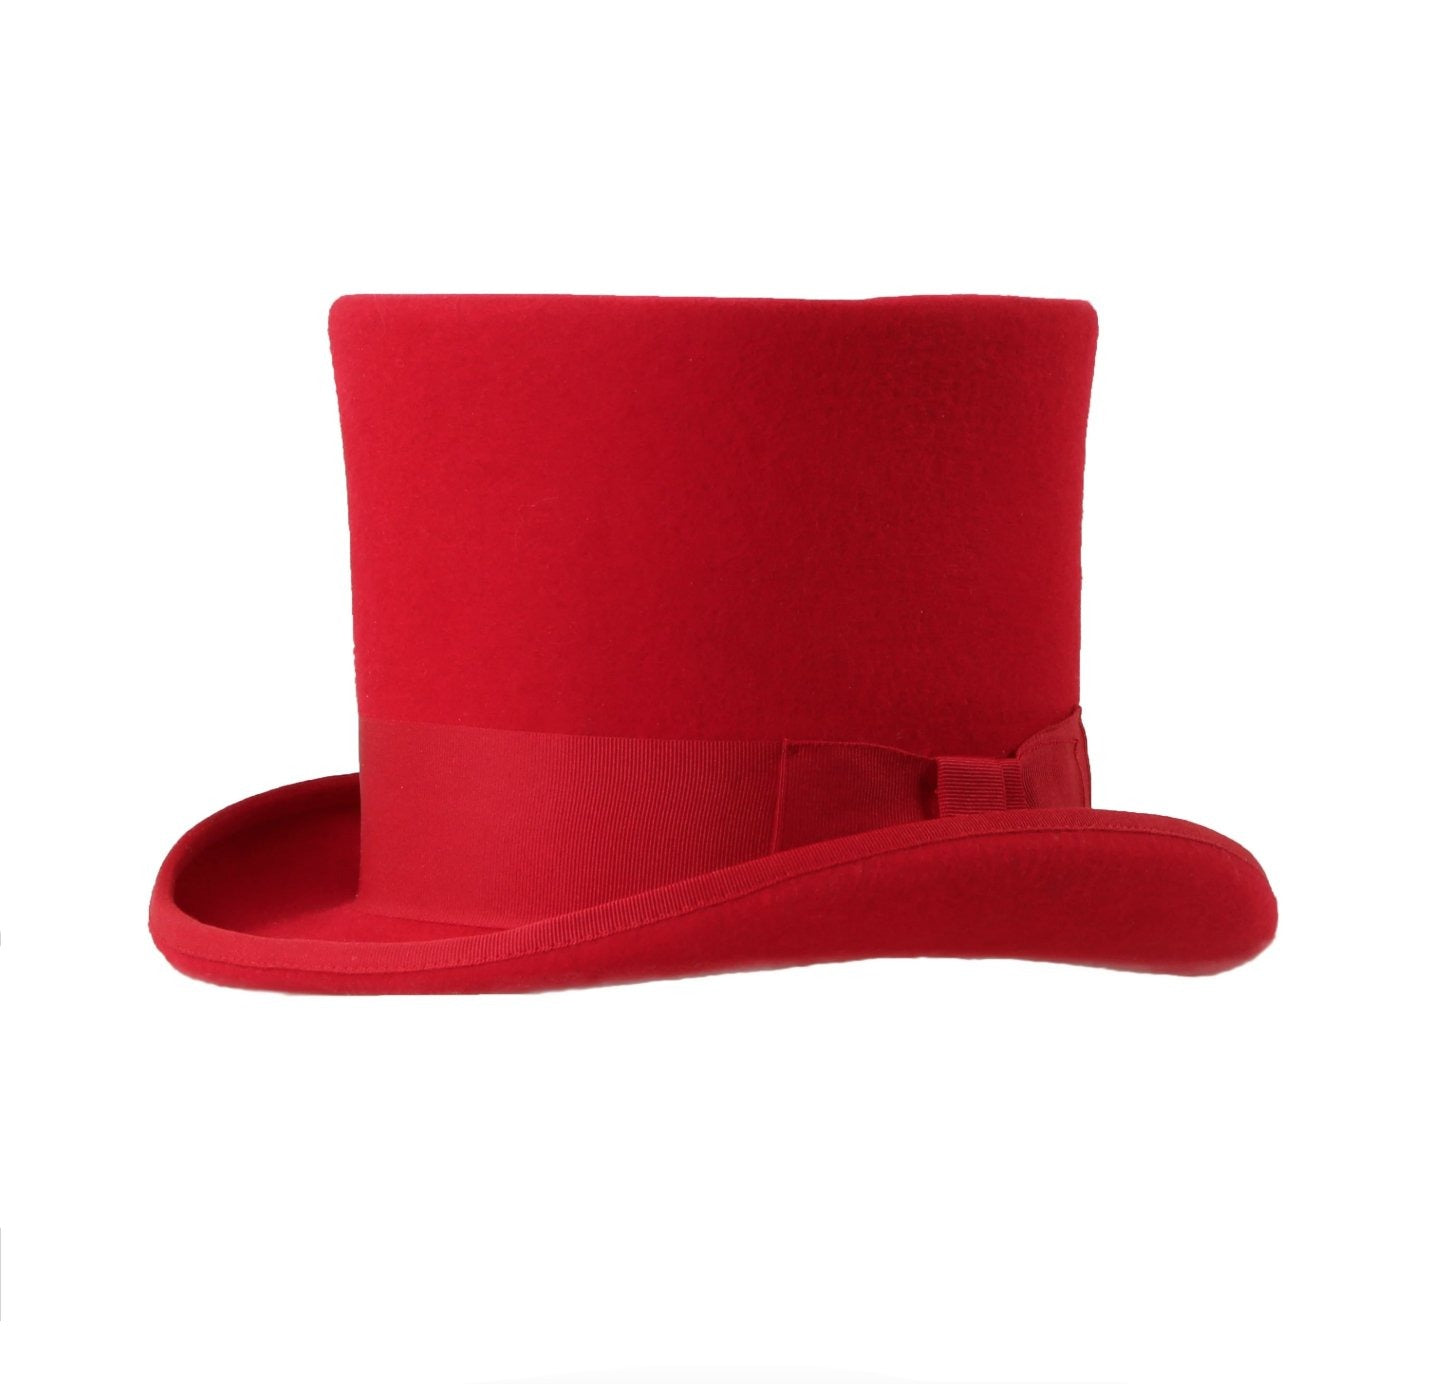 Mens Dress Tophat in Red